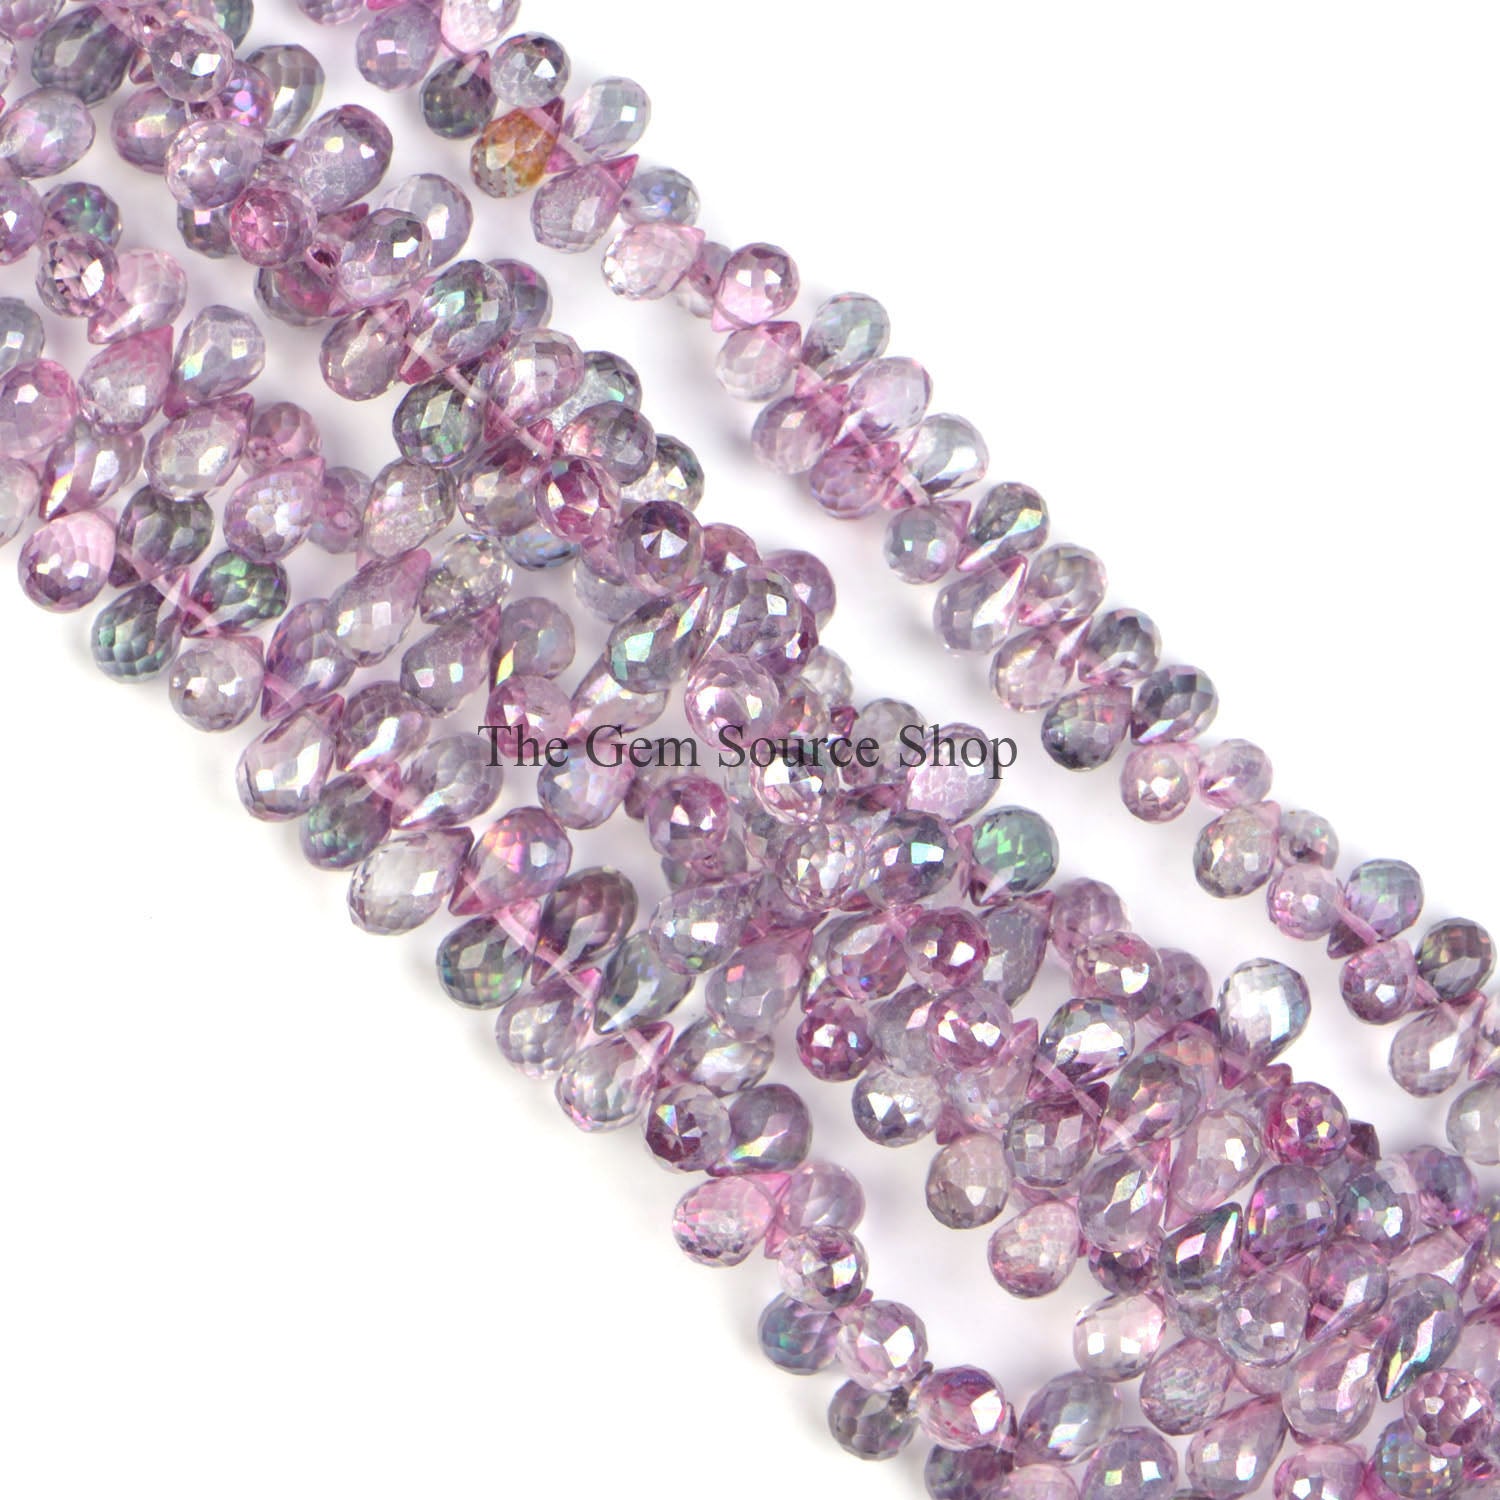 Pink Mystic Topaz Beads, Mystic Topaz Faceted Beads, Faceted Drop Beads, Mystic Topaz Gemstone